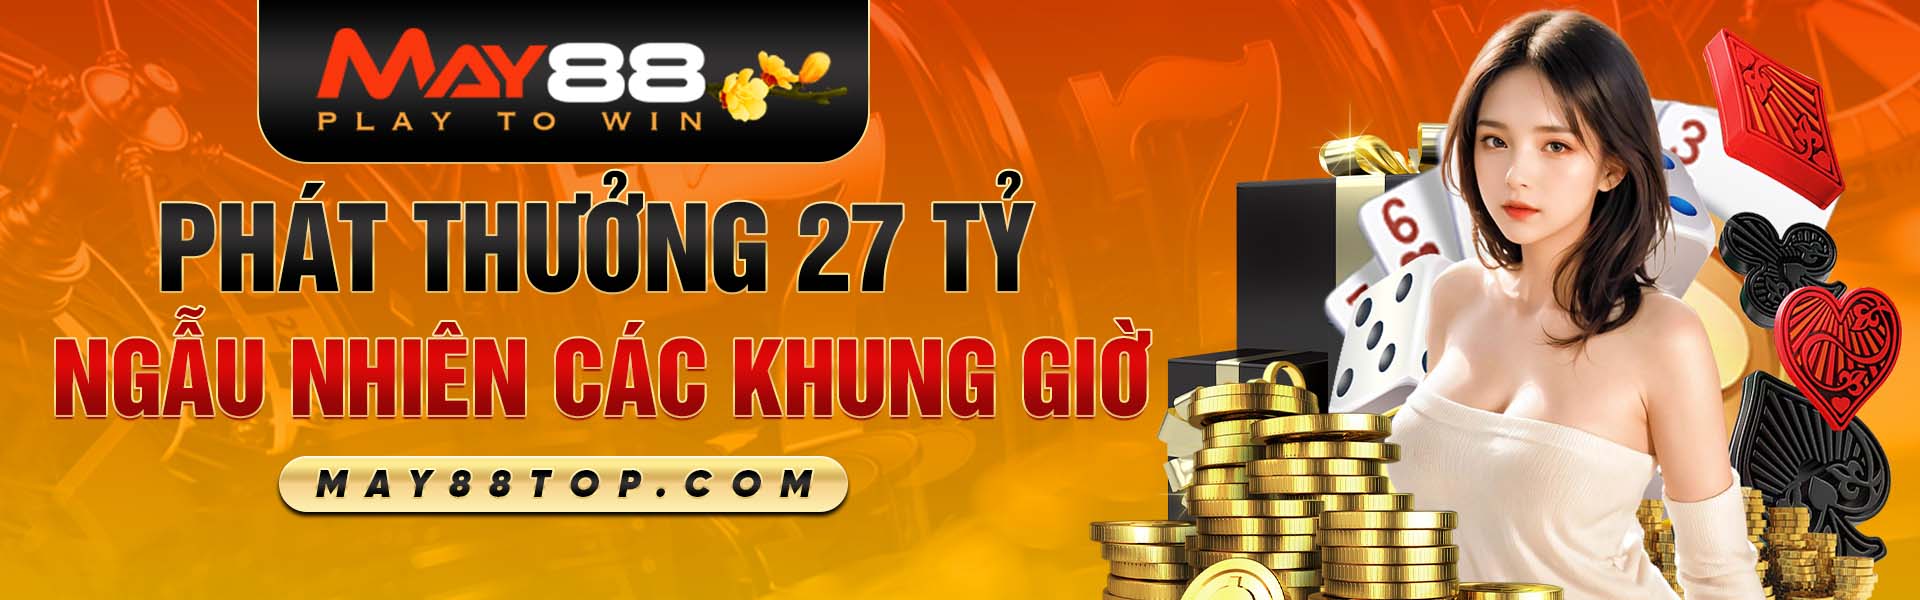 phat-thuong-27-ty-ngau-nhien-cac-khung-gio